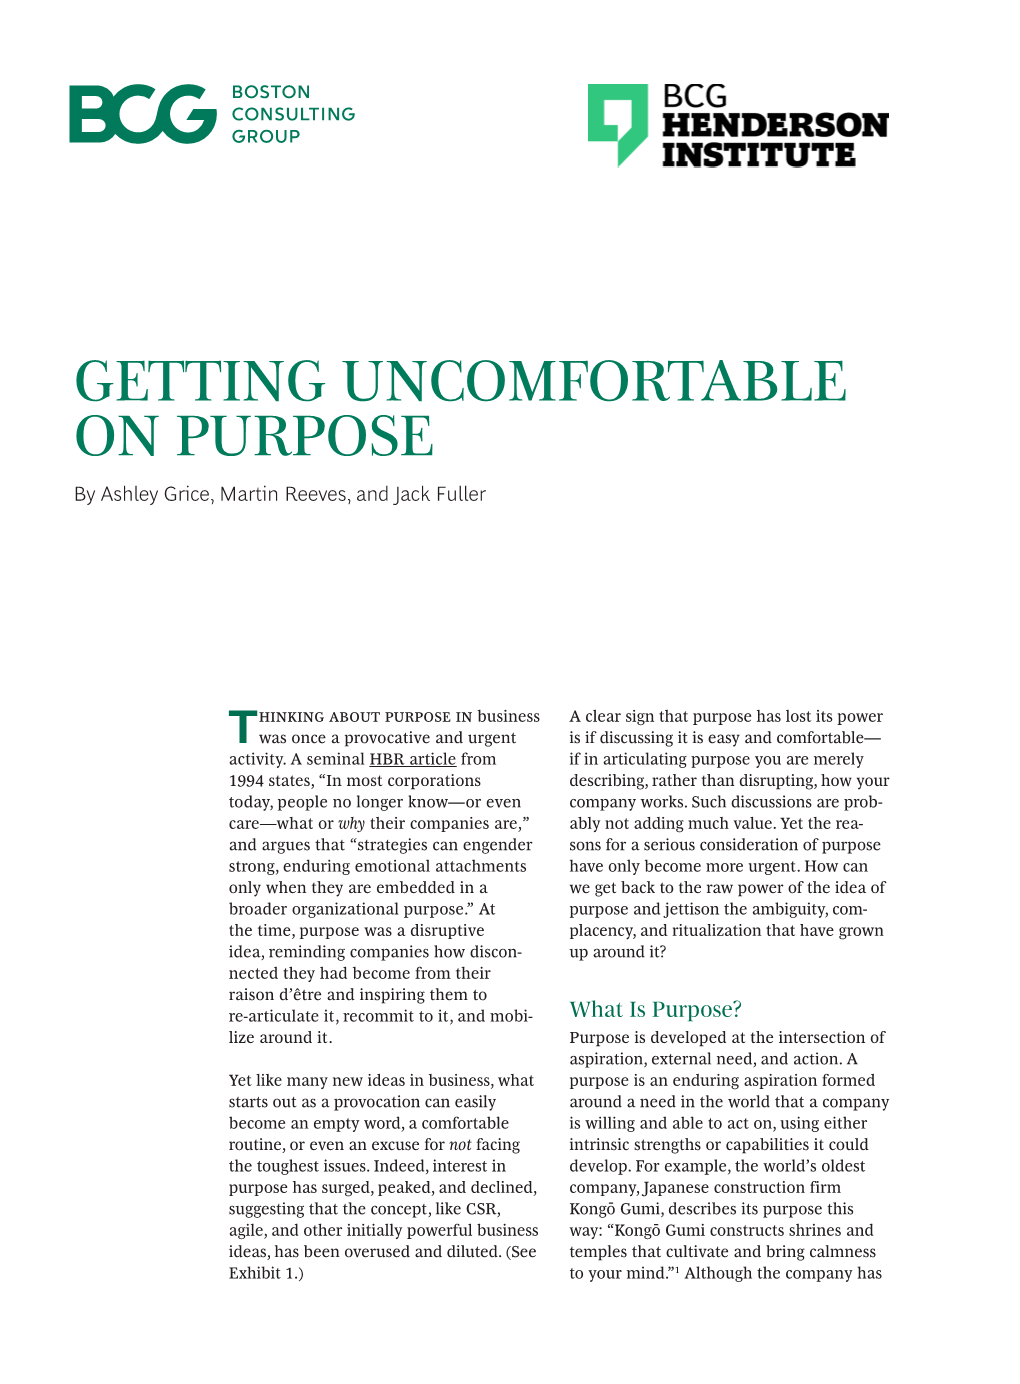 GETTING UNCOMFORTABLE on PURPOSE by Ashley Grice, Martin Reeves, and Jack Fuller